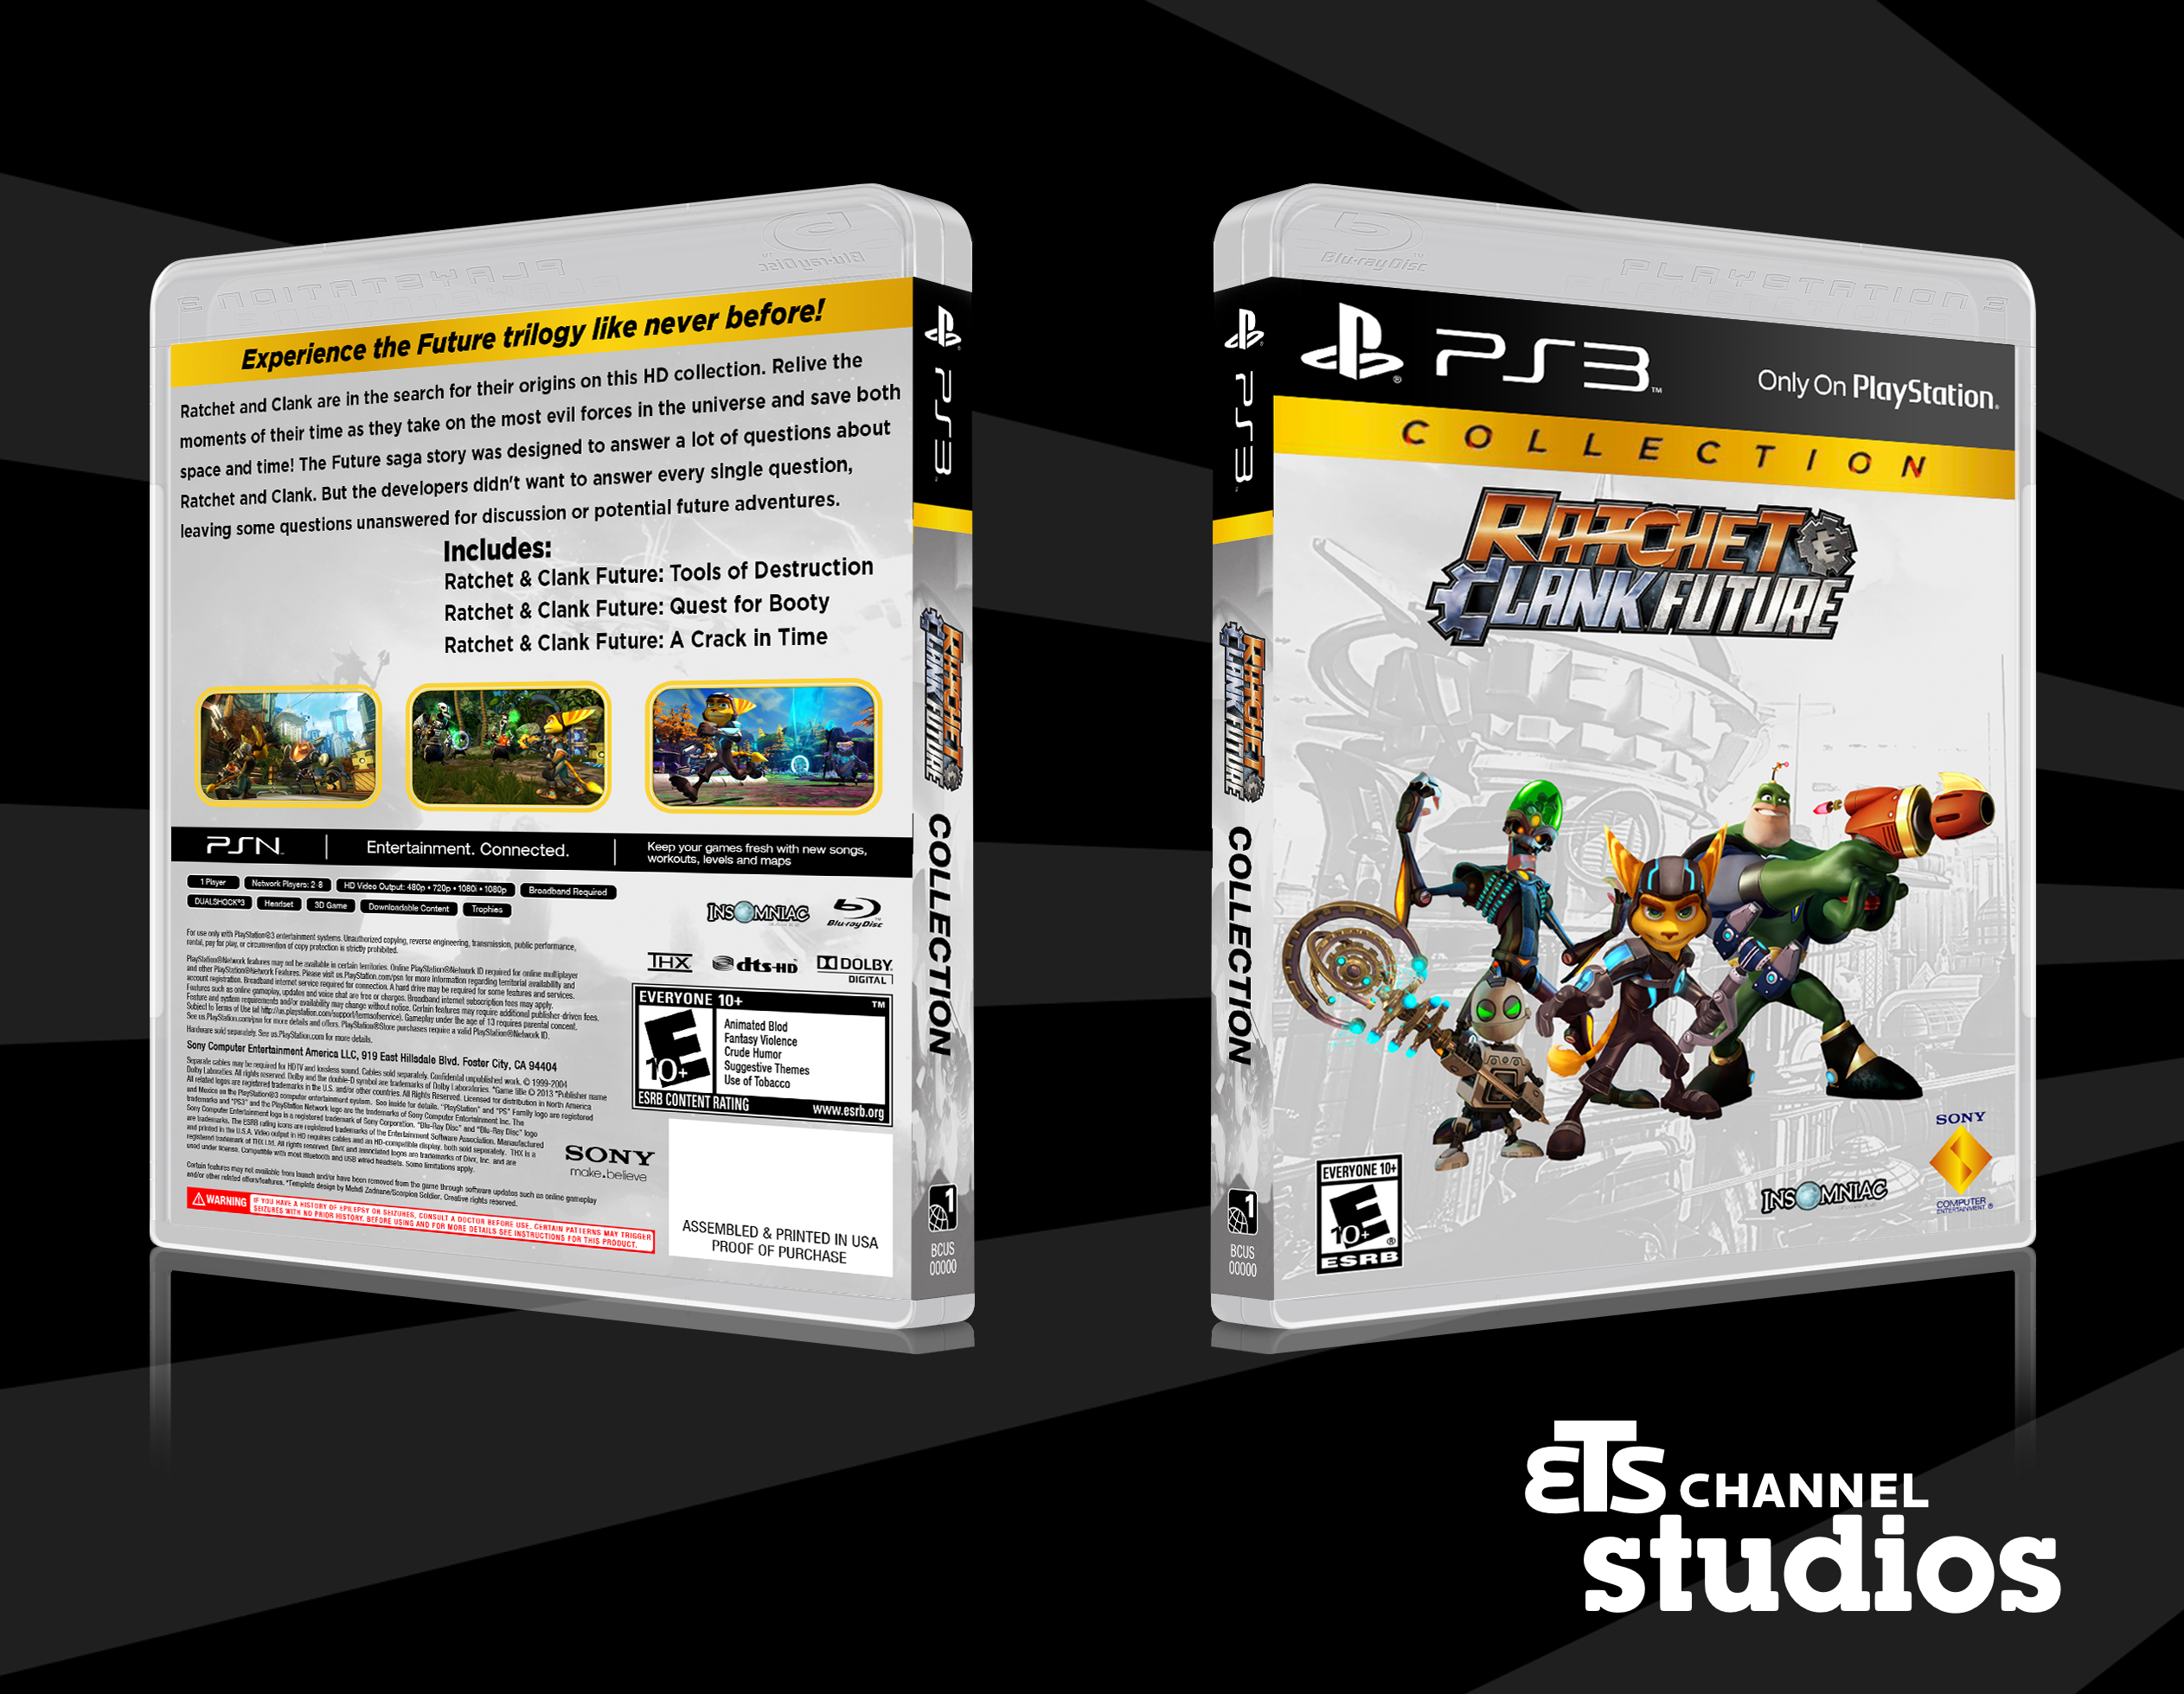 Ratchet & Clank Future HD Collection box cover